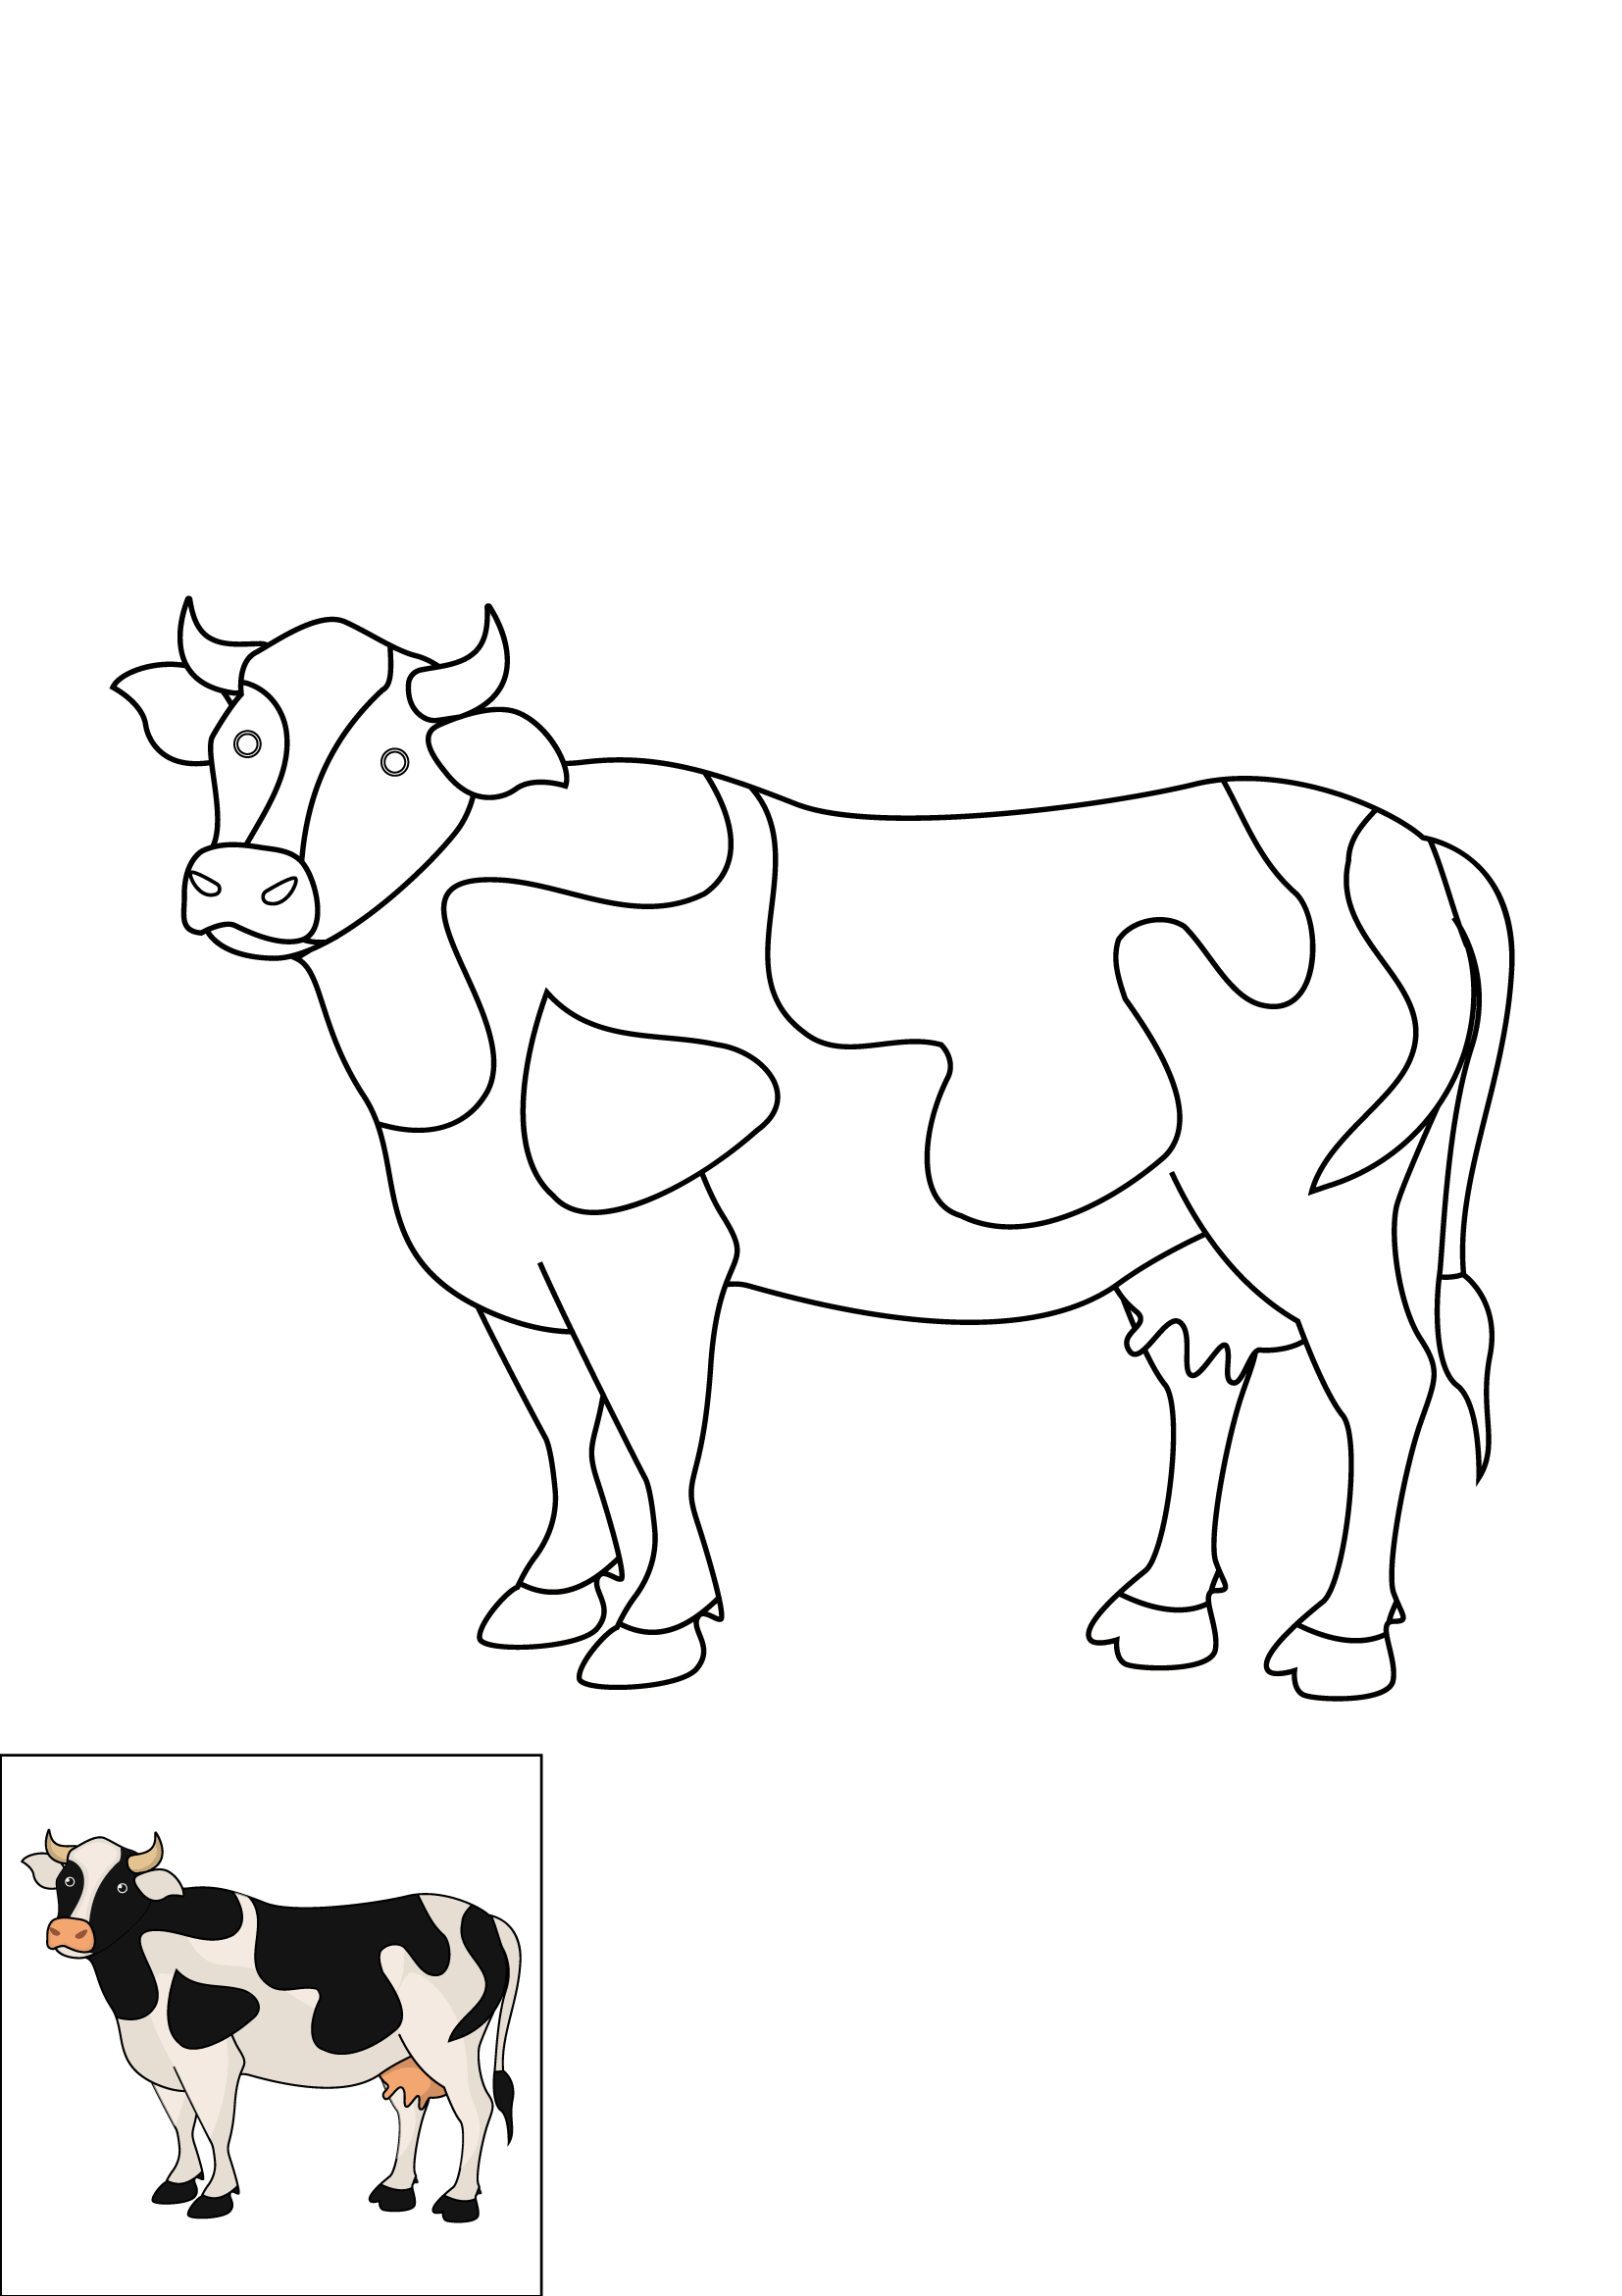 How to Draw A Cow Step by Step Printable Color